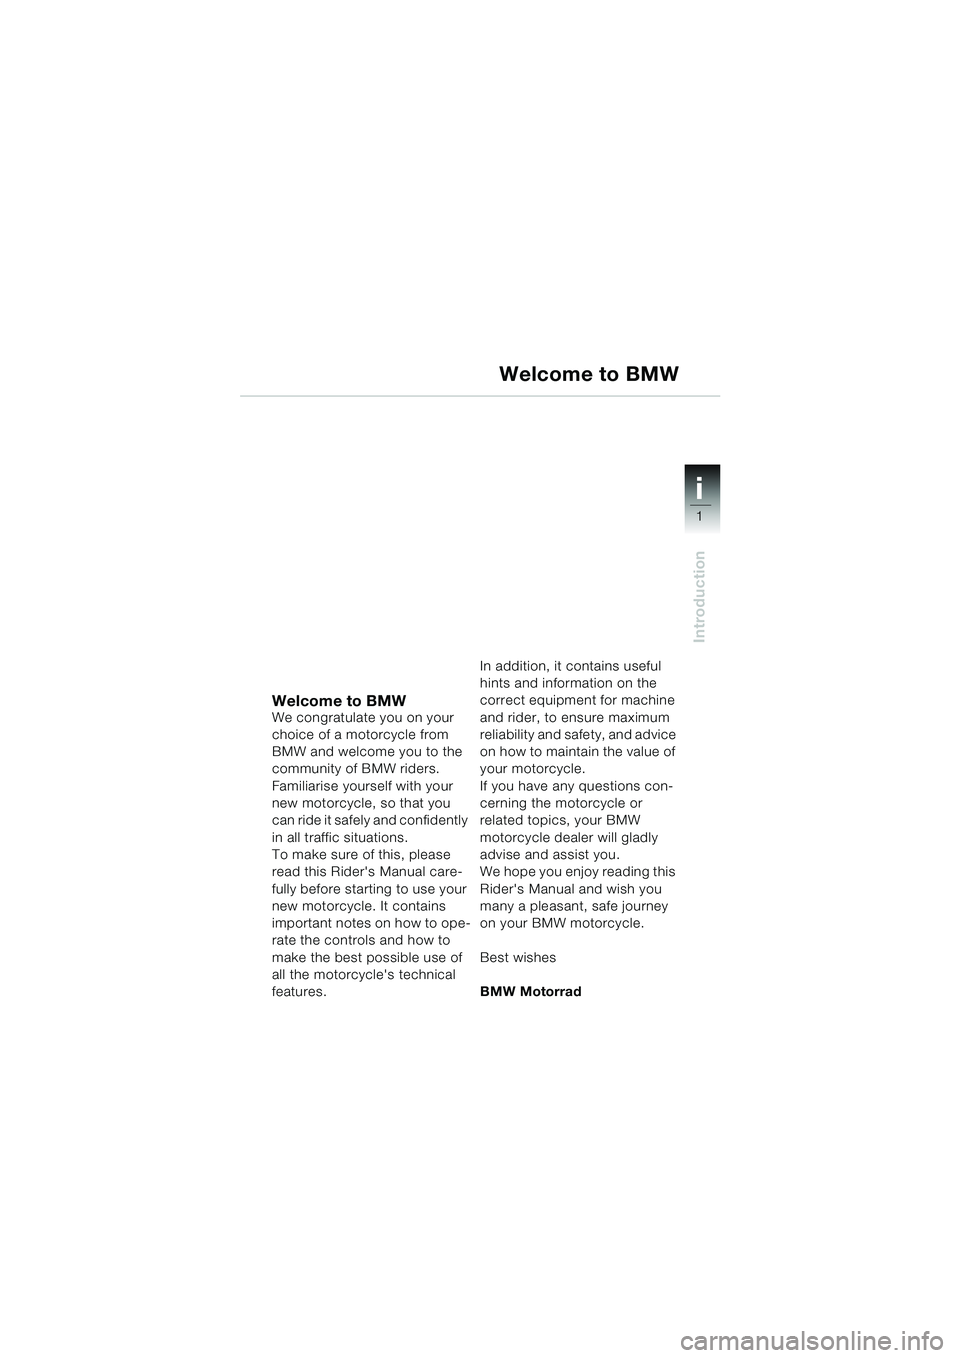 BMW MOTORRAD R 1100 S 2000  Riders Manual (in English) i
1
Introduction
i
Welcome to BMWWe congratulate you on your 
choice of a motorcycle from 
BMW and welcome you to the 
community of BMW riders.
Familiarise yourself with your 
new motorcycle, so that 